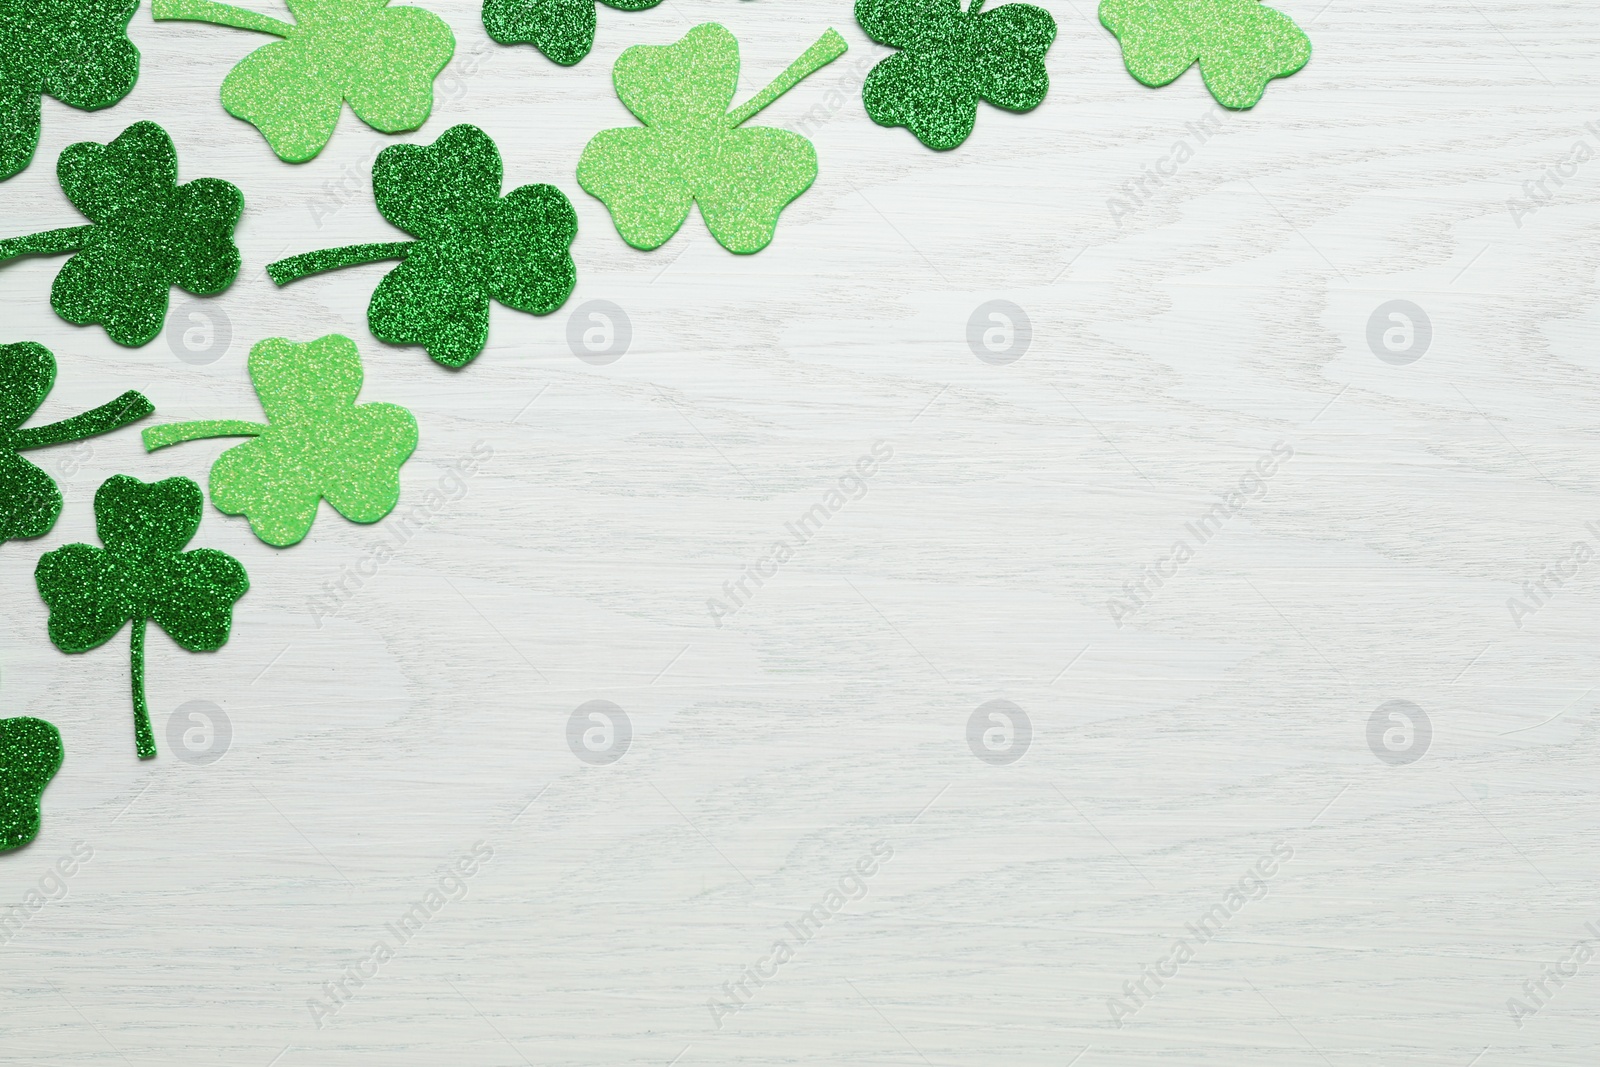 Photo of Decorative clover leaves on white wooden table, flat lay with space for text. Saint Patrick's Day celebration